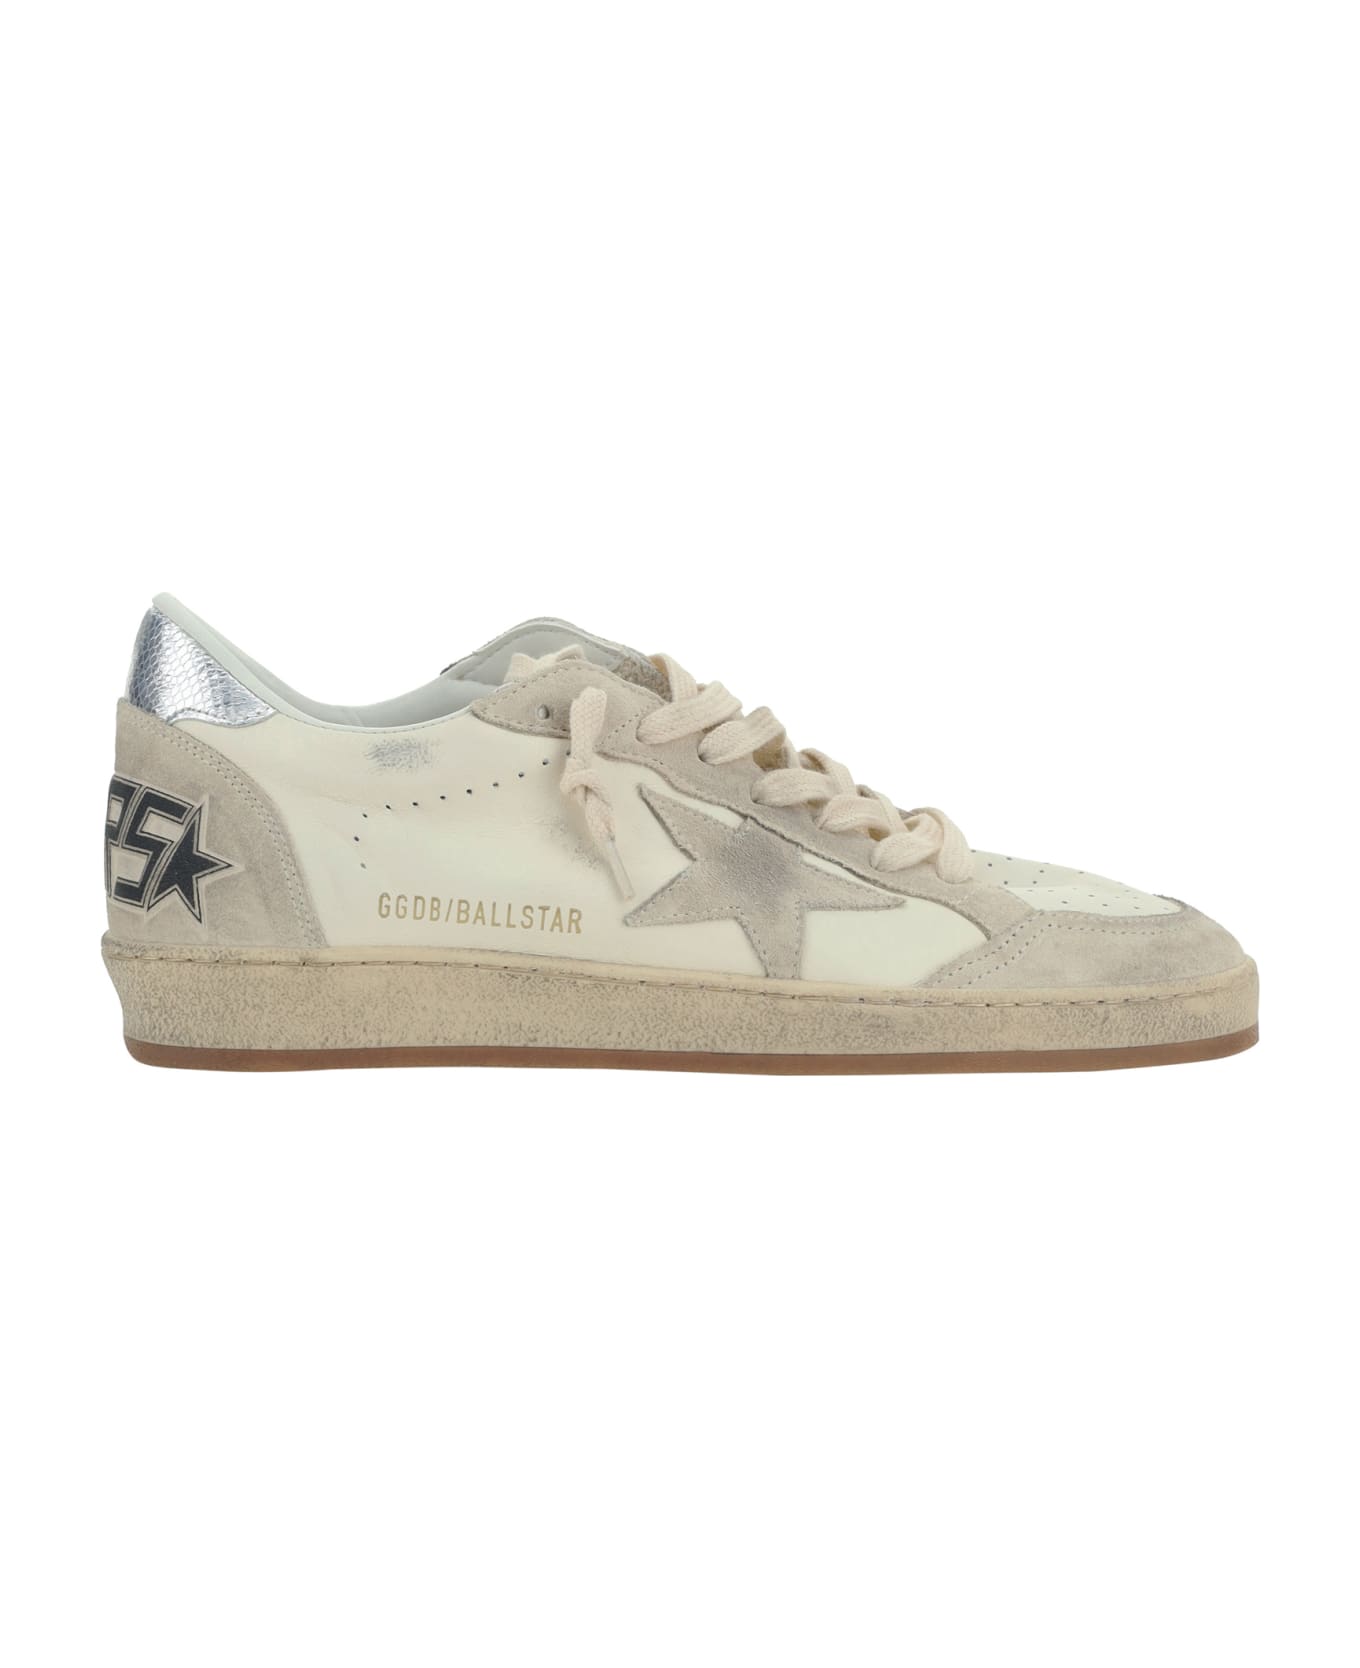 Golden Goose Ball Star Sneakers - White/seedpearl/silver